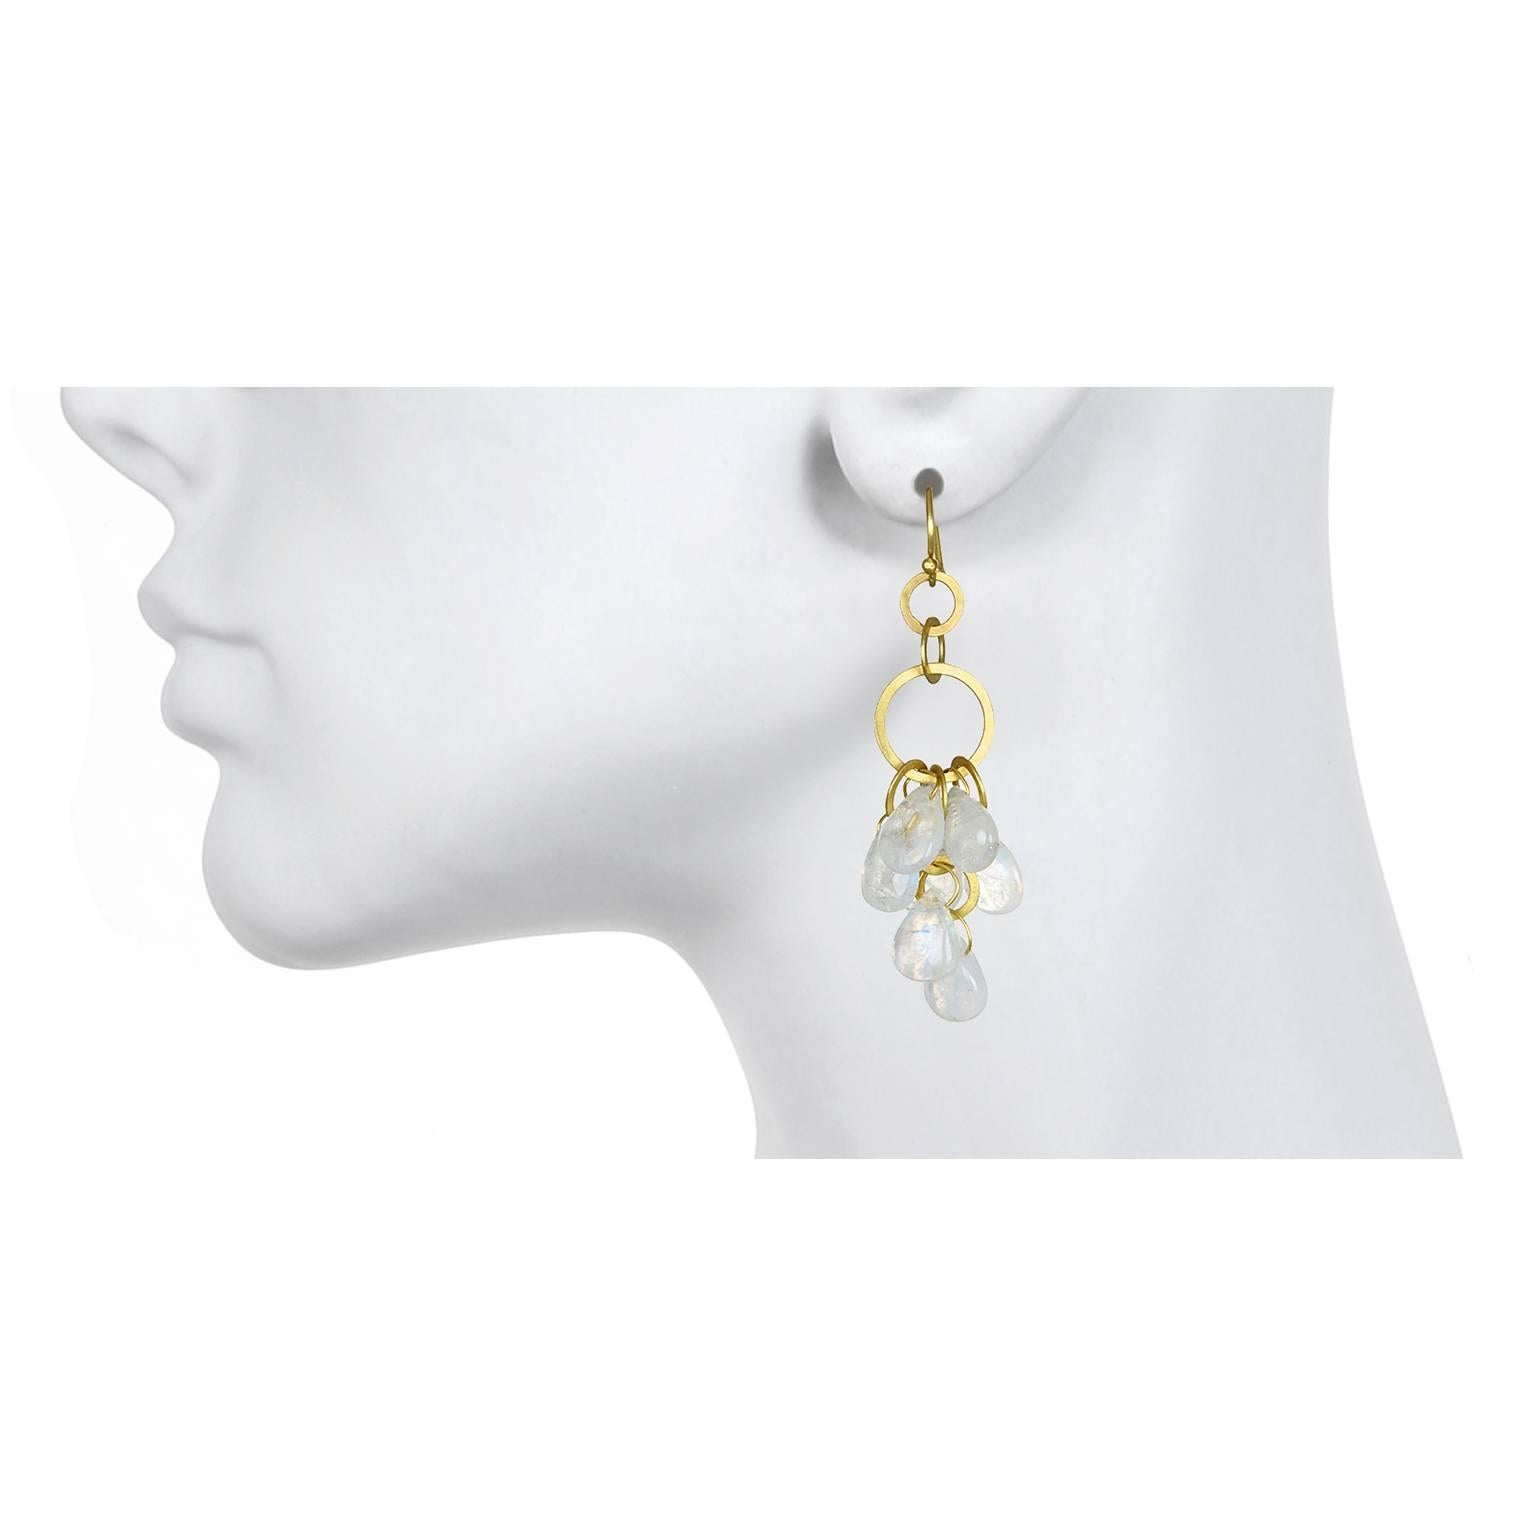 A perennial favorite, Faye Kim's earrings in 18k gold are handmade with shimmering moonstone briolettes.  Fun, and versatile, moonstones are easy to pair with other colors and can easily go from day to evening. French ear wires. Matte